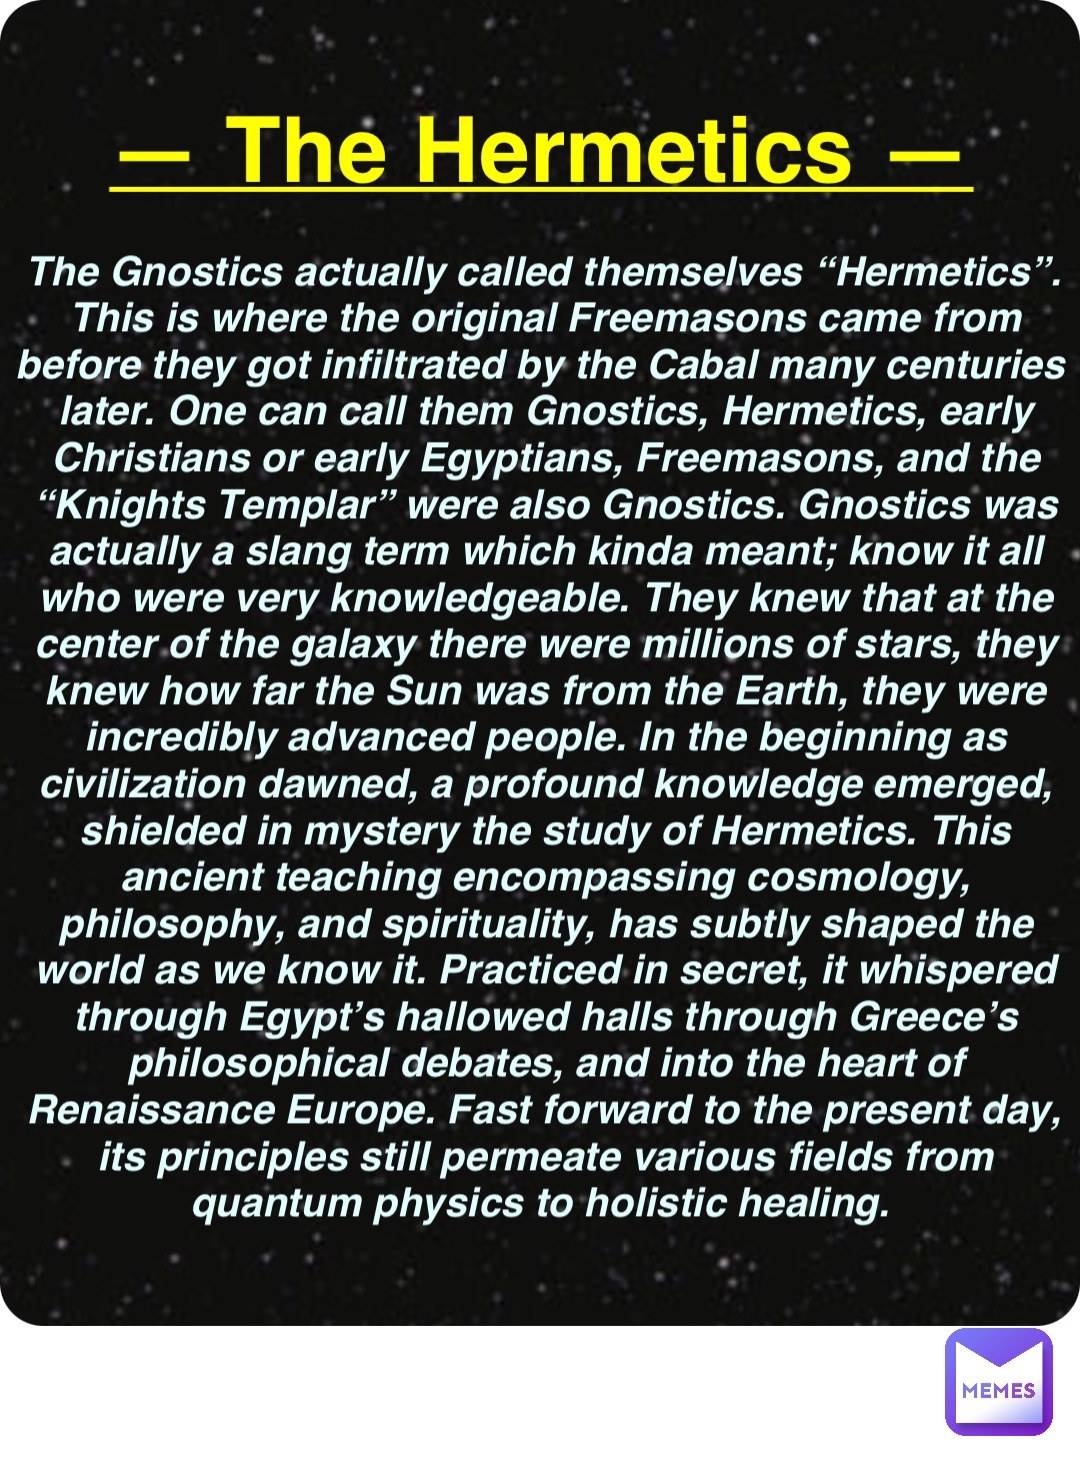 Double tap to edit — The Hermetics — The Gnostics actually called themselves “Hermetics”. This is where the original Freemasons came from before they got infiltrated by the Cabal many centuries later. One can call them Gnostics, Hermetics, early Christians or early Egyptians, Freemasons, and the “Knights Templar” were also Gnostics. Gnostics was actually a slang term which kinda meant; know it all who were very knowledgeable. They knew that at the center of the galaxy there were millions of stars, they knew how far the Sun was from the Earth, they were incredibly advanced people. In the beginning as civilization dawned, a profound knowledge emerged, shielded in mystery the study of Hermetics. This ancient teaching encompassing cosmology, philosophy, and spirituality, has subtly shaped the world as we know it. Practiced in secret, it whispered through Egypt’s hallowed halls through Greece’s philosophical debates, and into the heart of Renaissance Europe. Fast forward to the present day, its principles still permeate various fields from quantum physics to holistic healing.